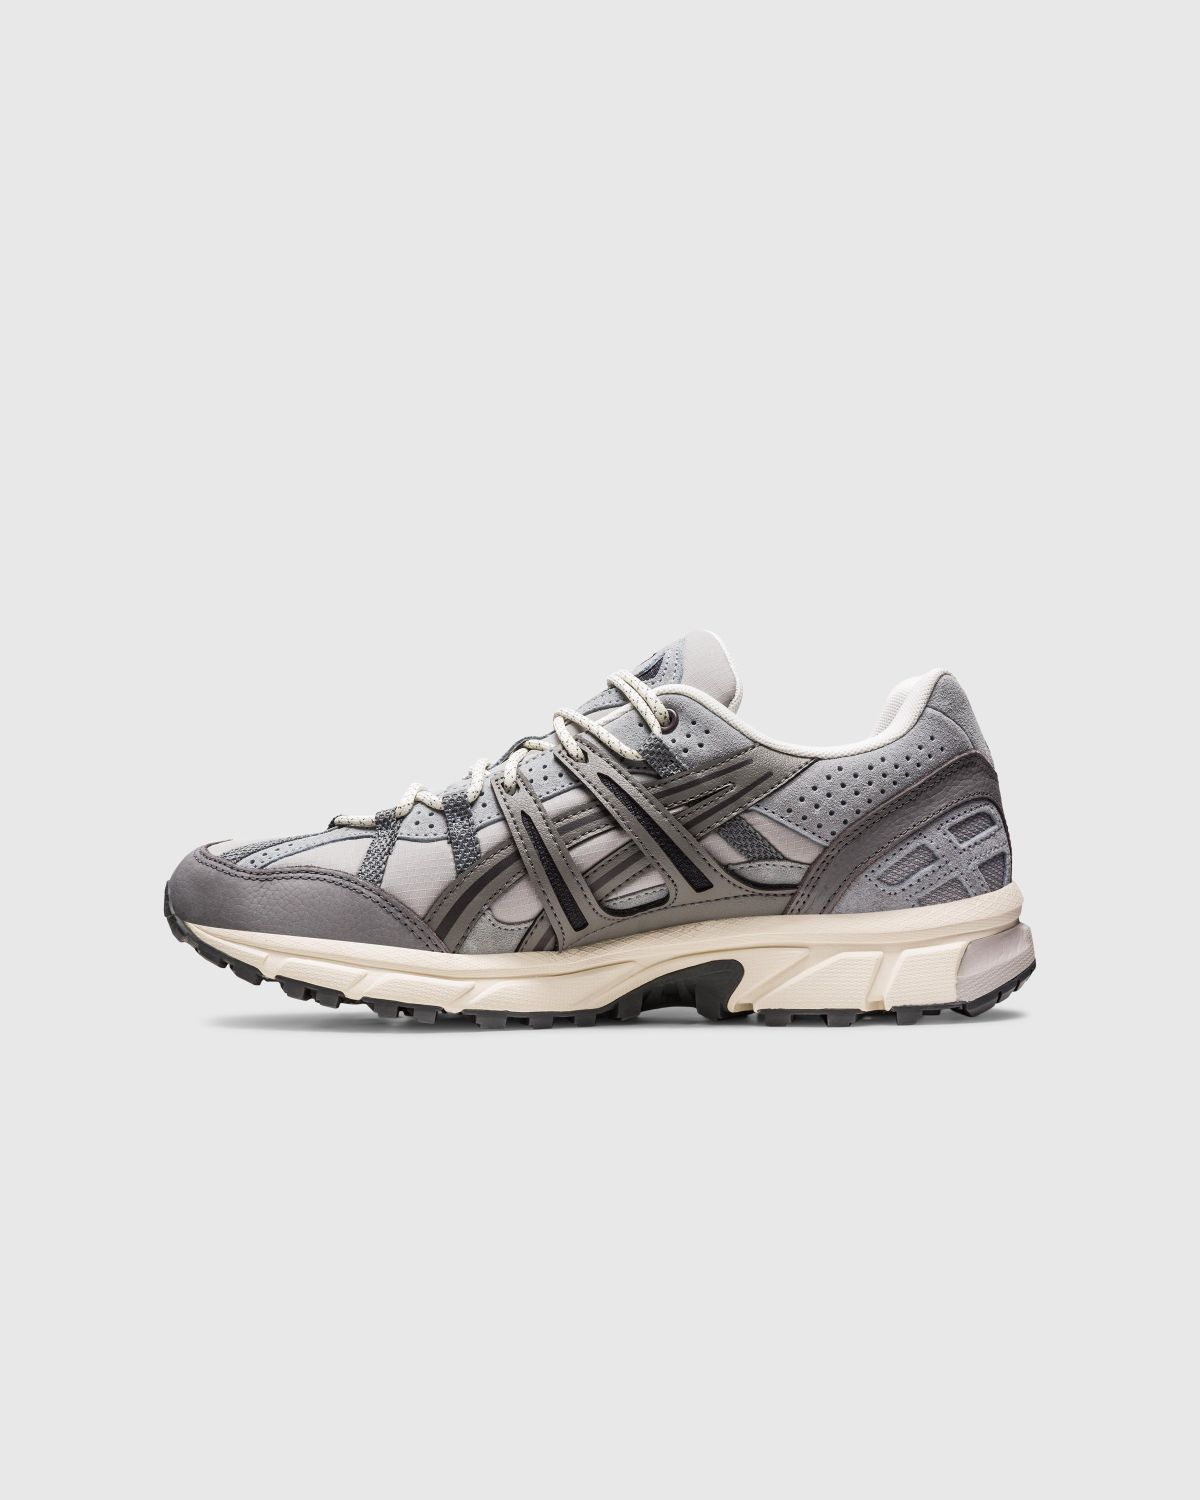 asics – GEL-SONOMA 15-50 Oyster Grey/Clay Grey - Sneakers - Grey - Image 2